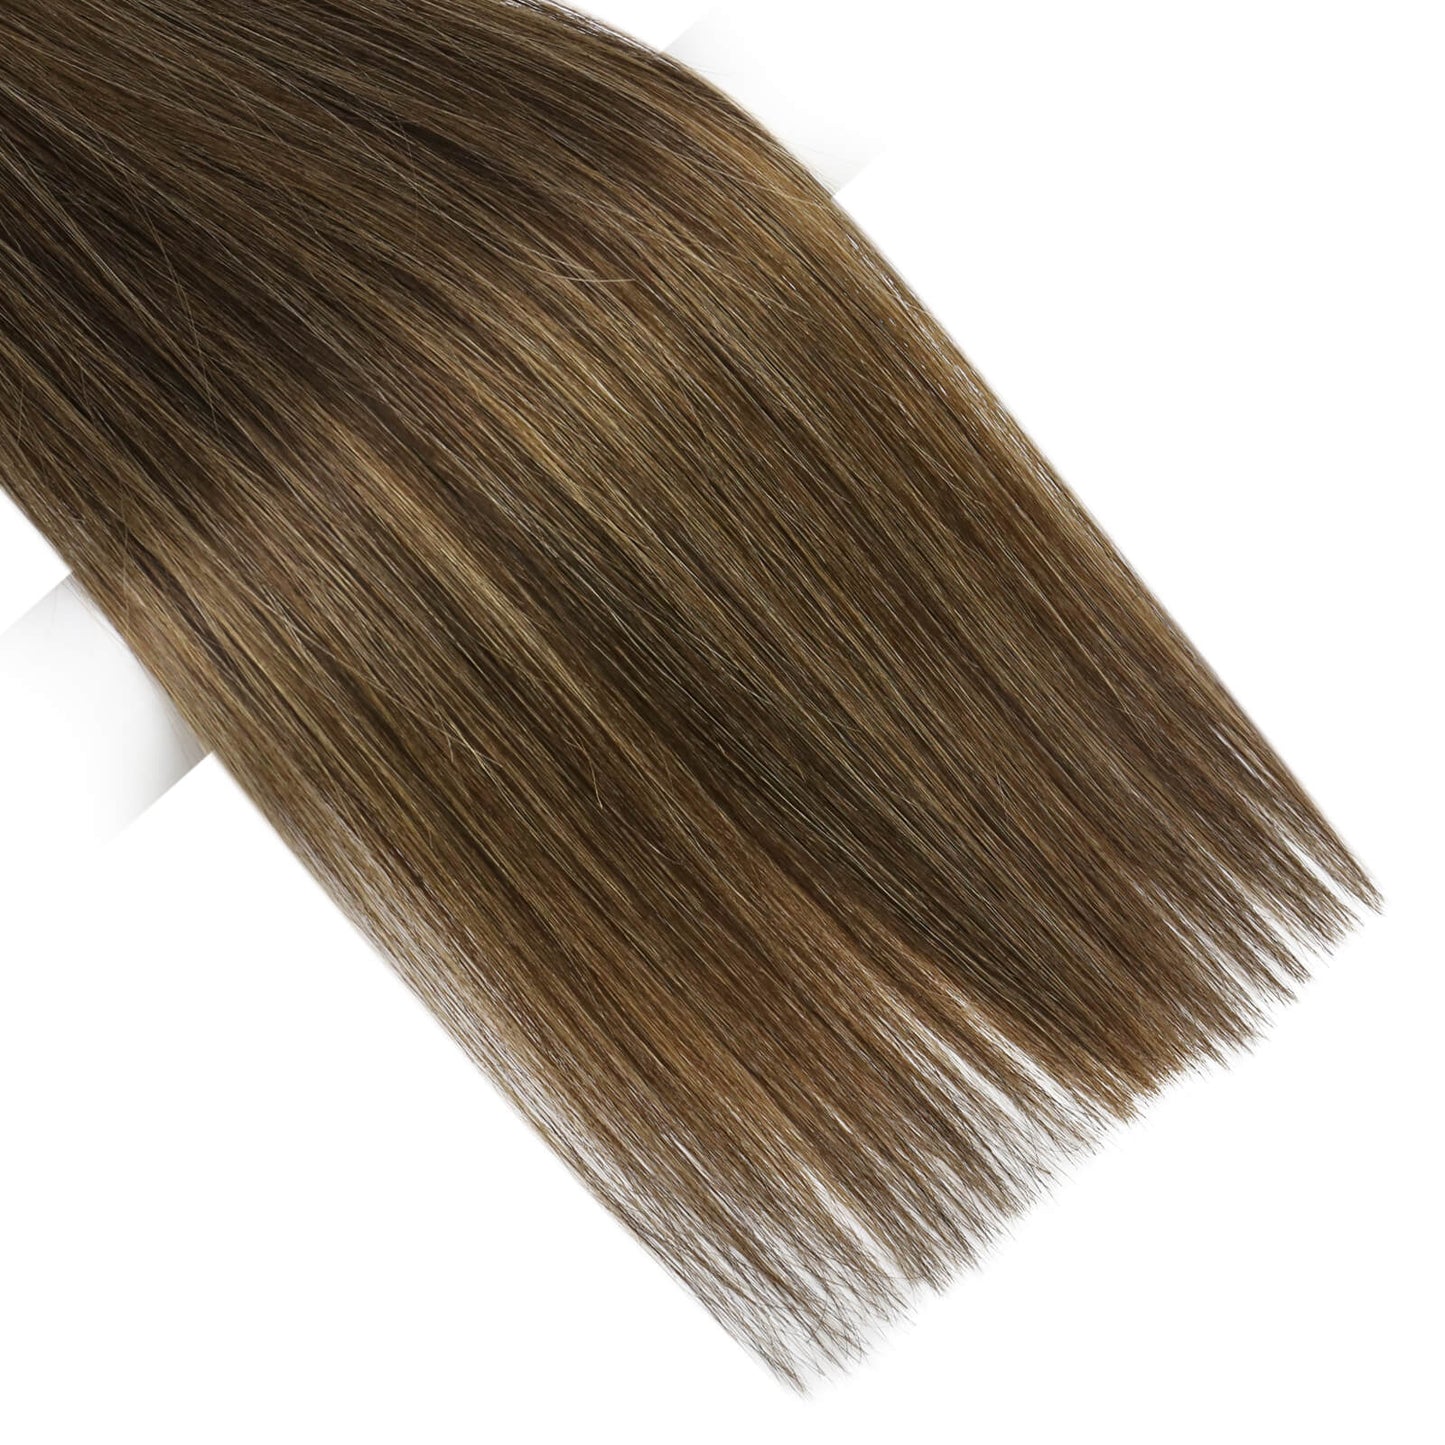 real human hair weft extensions hair weft vendor